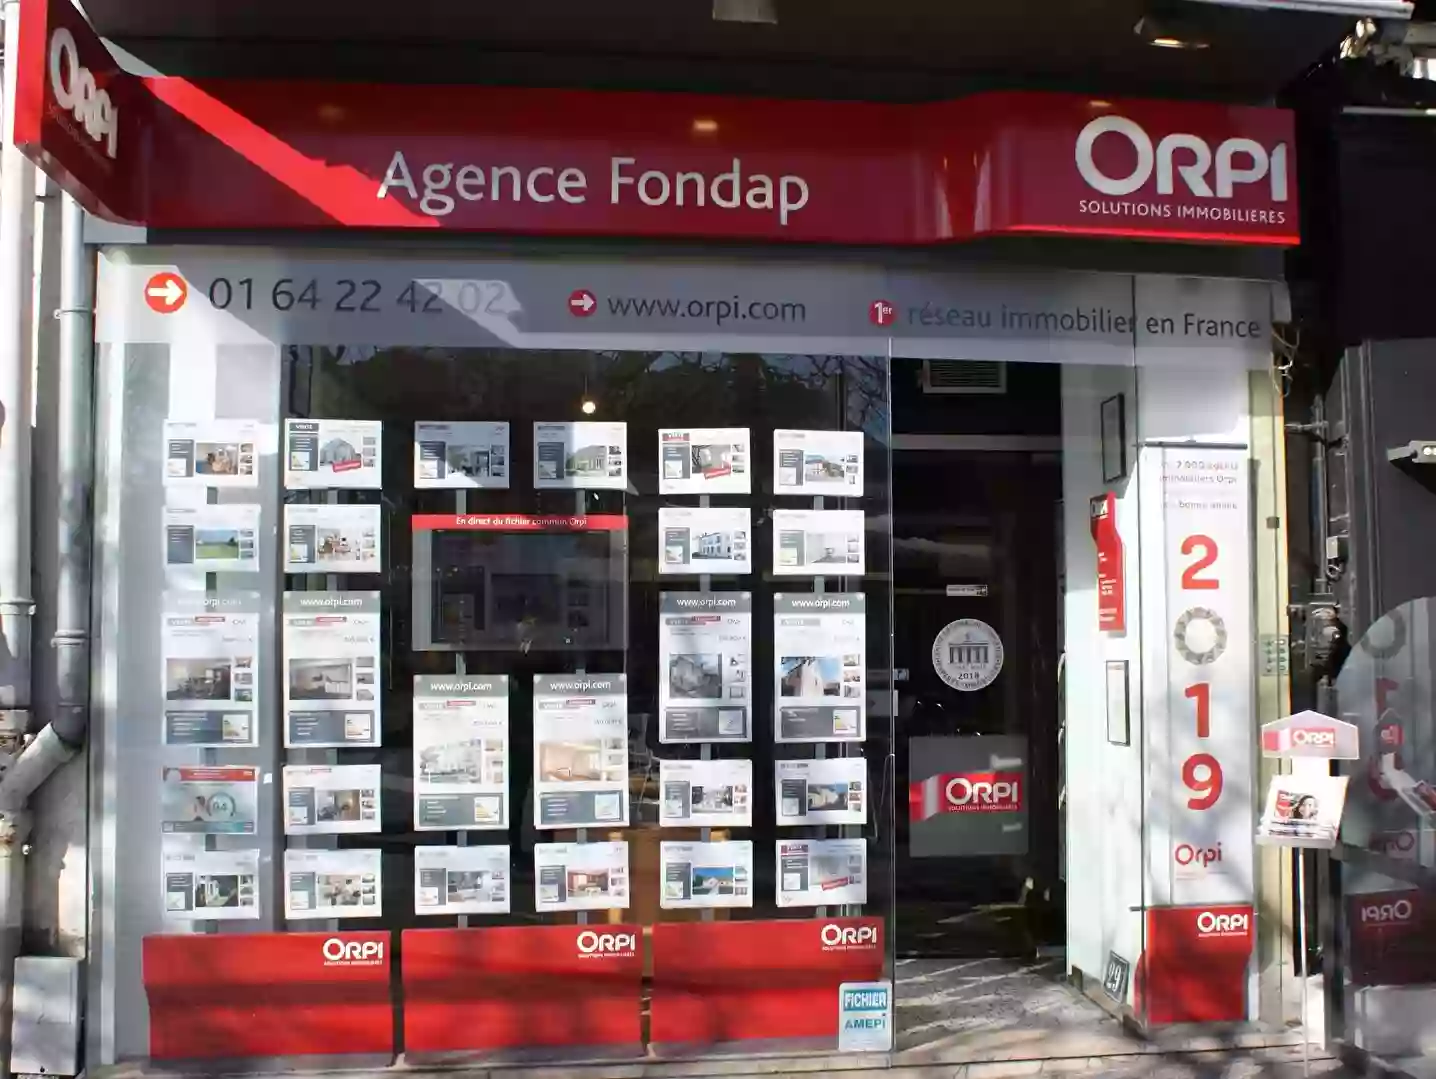 ORPI agence FONDAP - Bourgeois immobilier